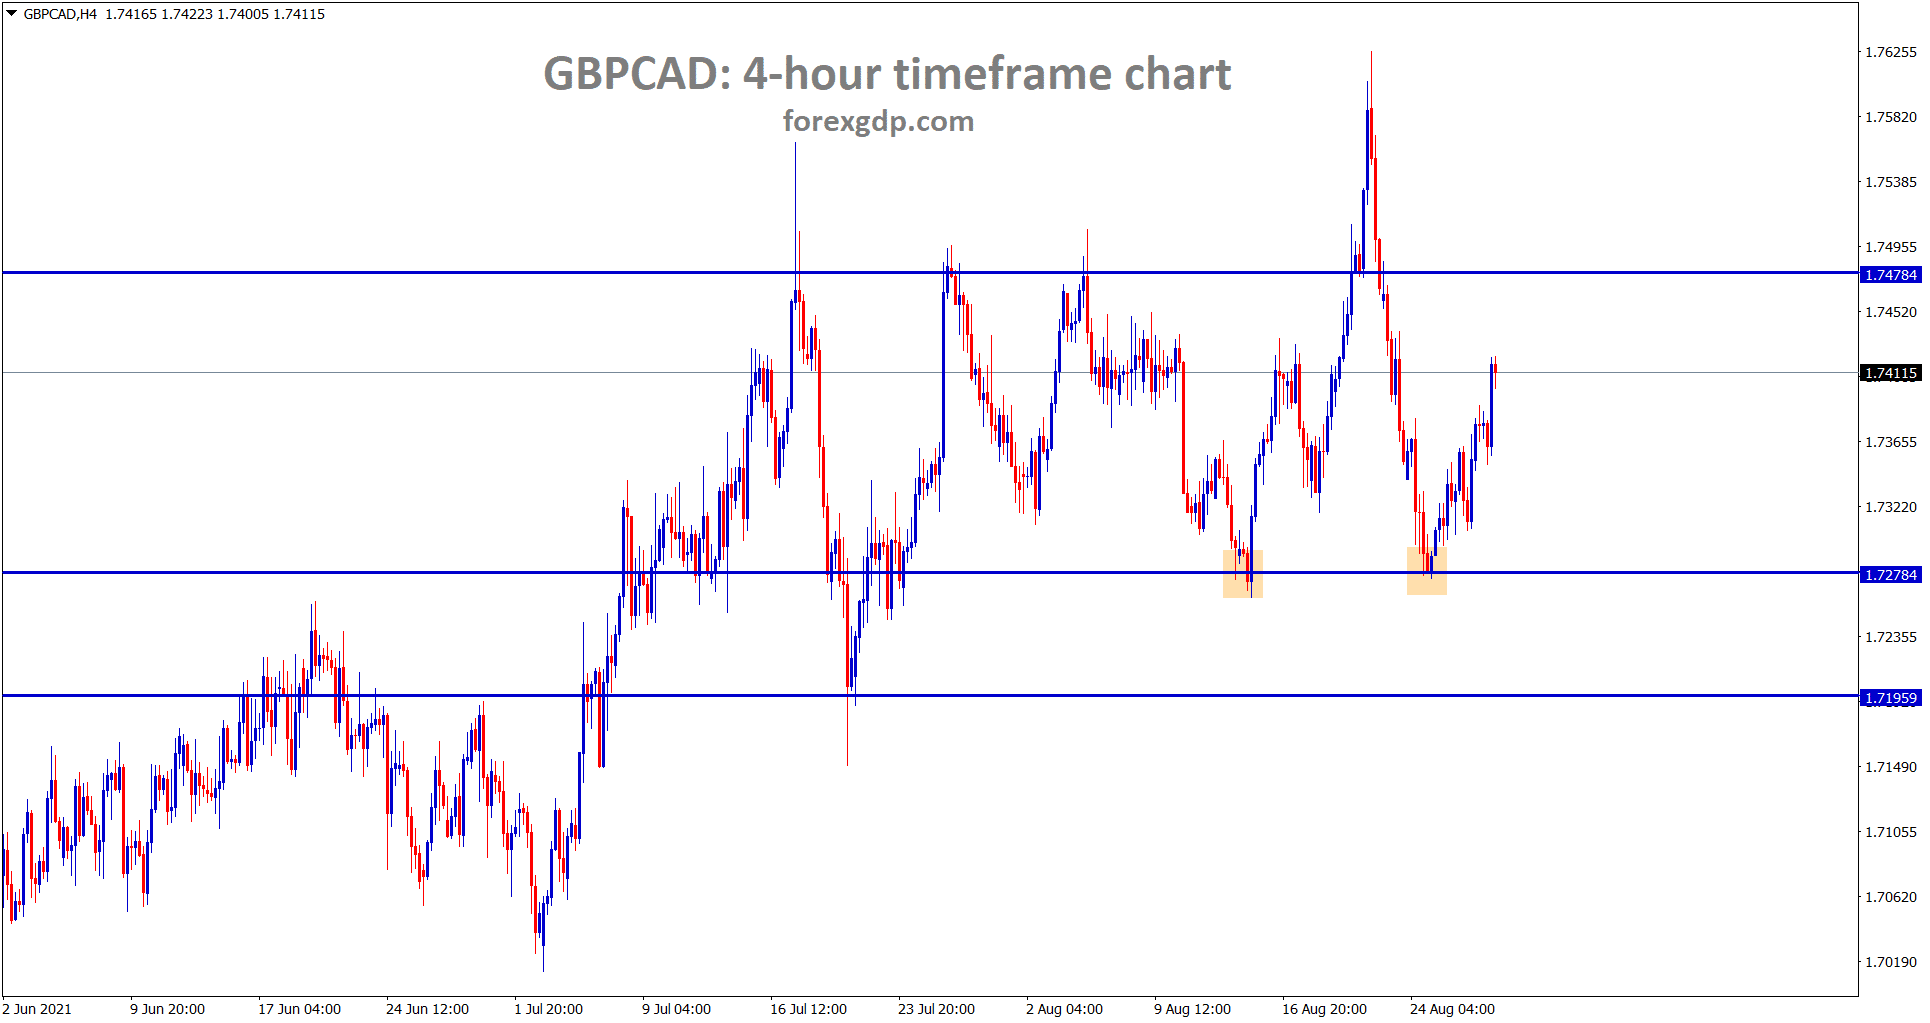 GBPCAD bounces back harder after hitting the support area however price is ranging between the support and resistance areas